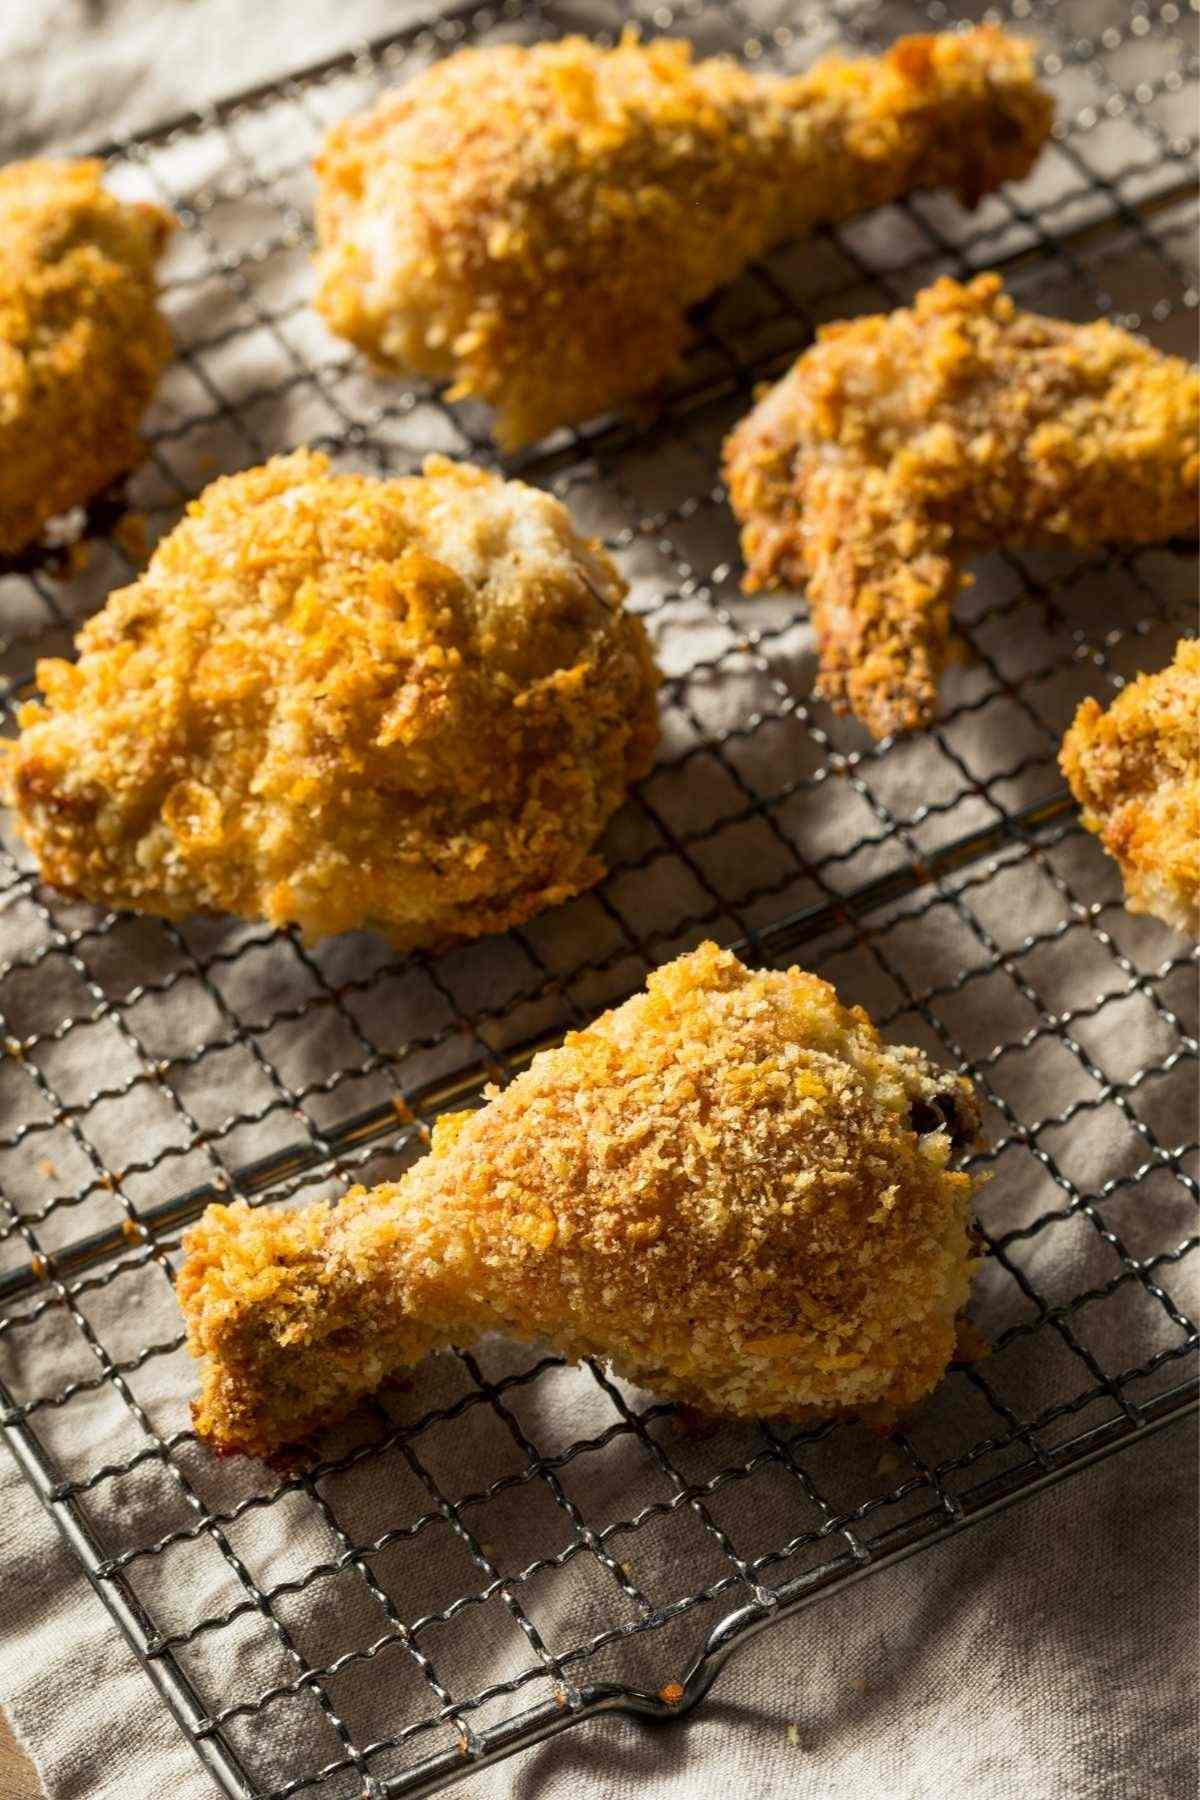 Bisquick Oven Fried Chicken is crispy, tender, and flavorful. To make life even easier and to save time, use Bisquick to make oven-fried chicken. And while the chicken is baking, you can prepare the sides for a weeknight meal your family will love.